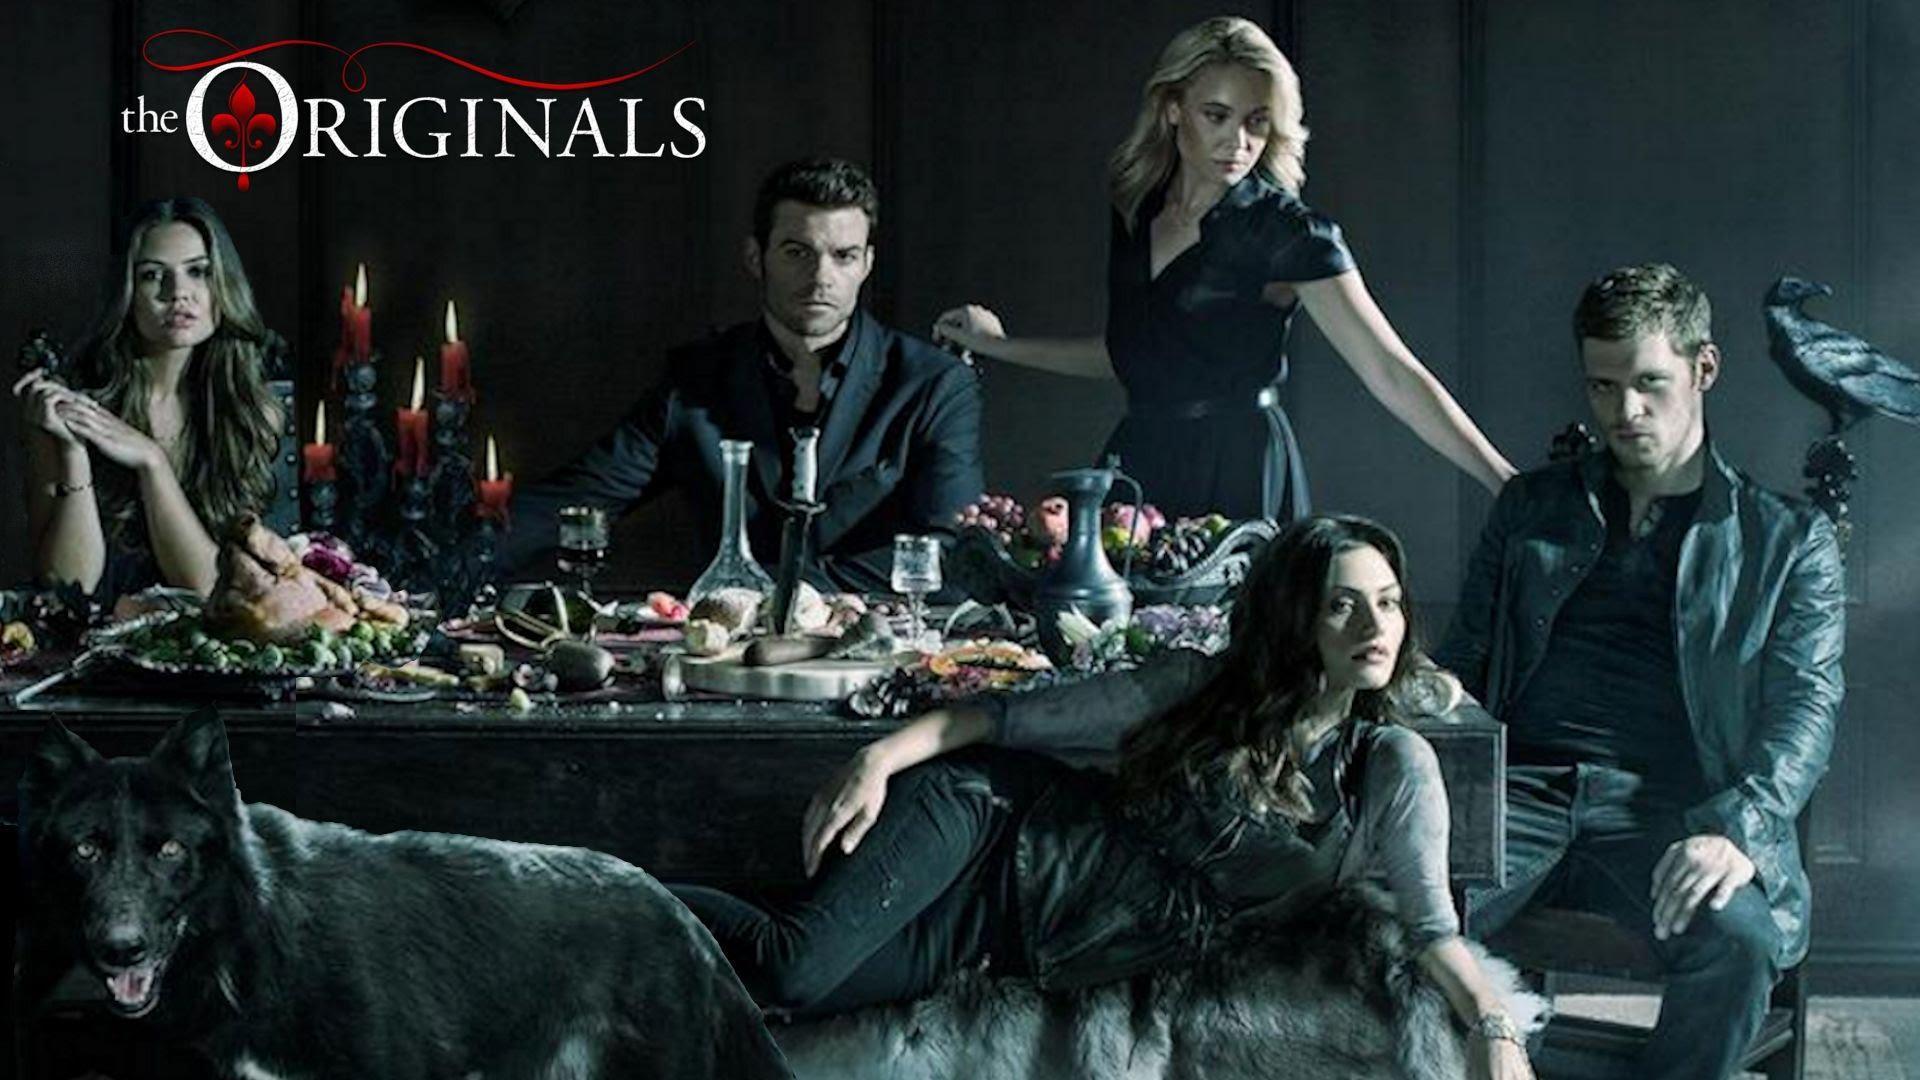 The Originals E18 "The Devil Comes Here and Sighs" Podcast